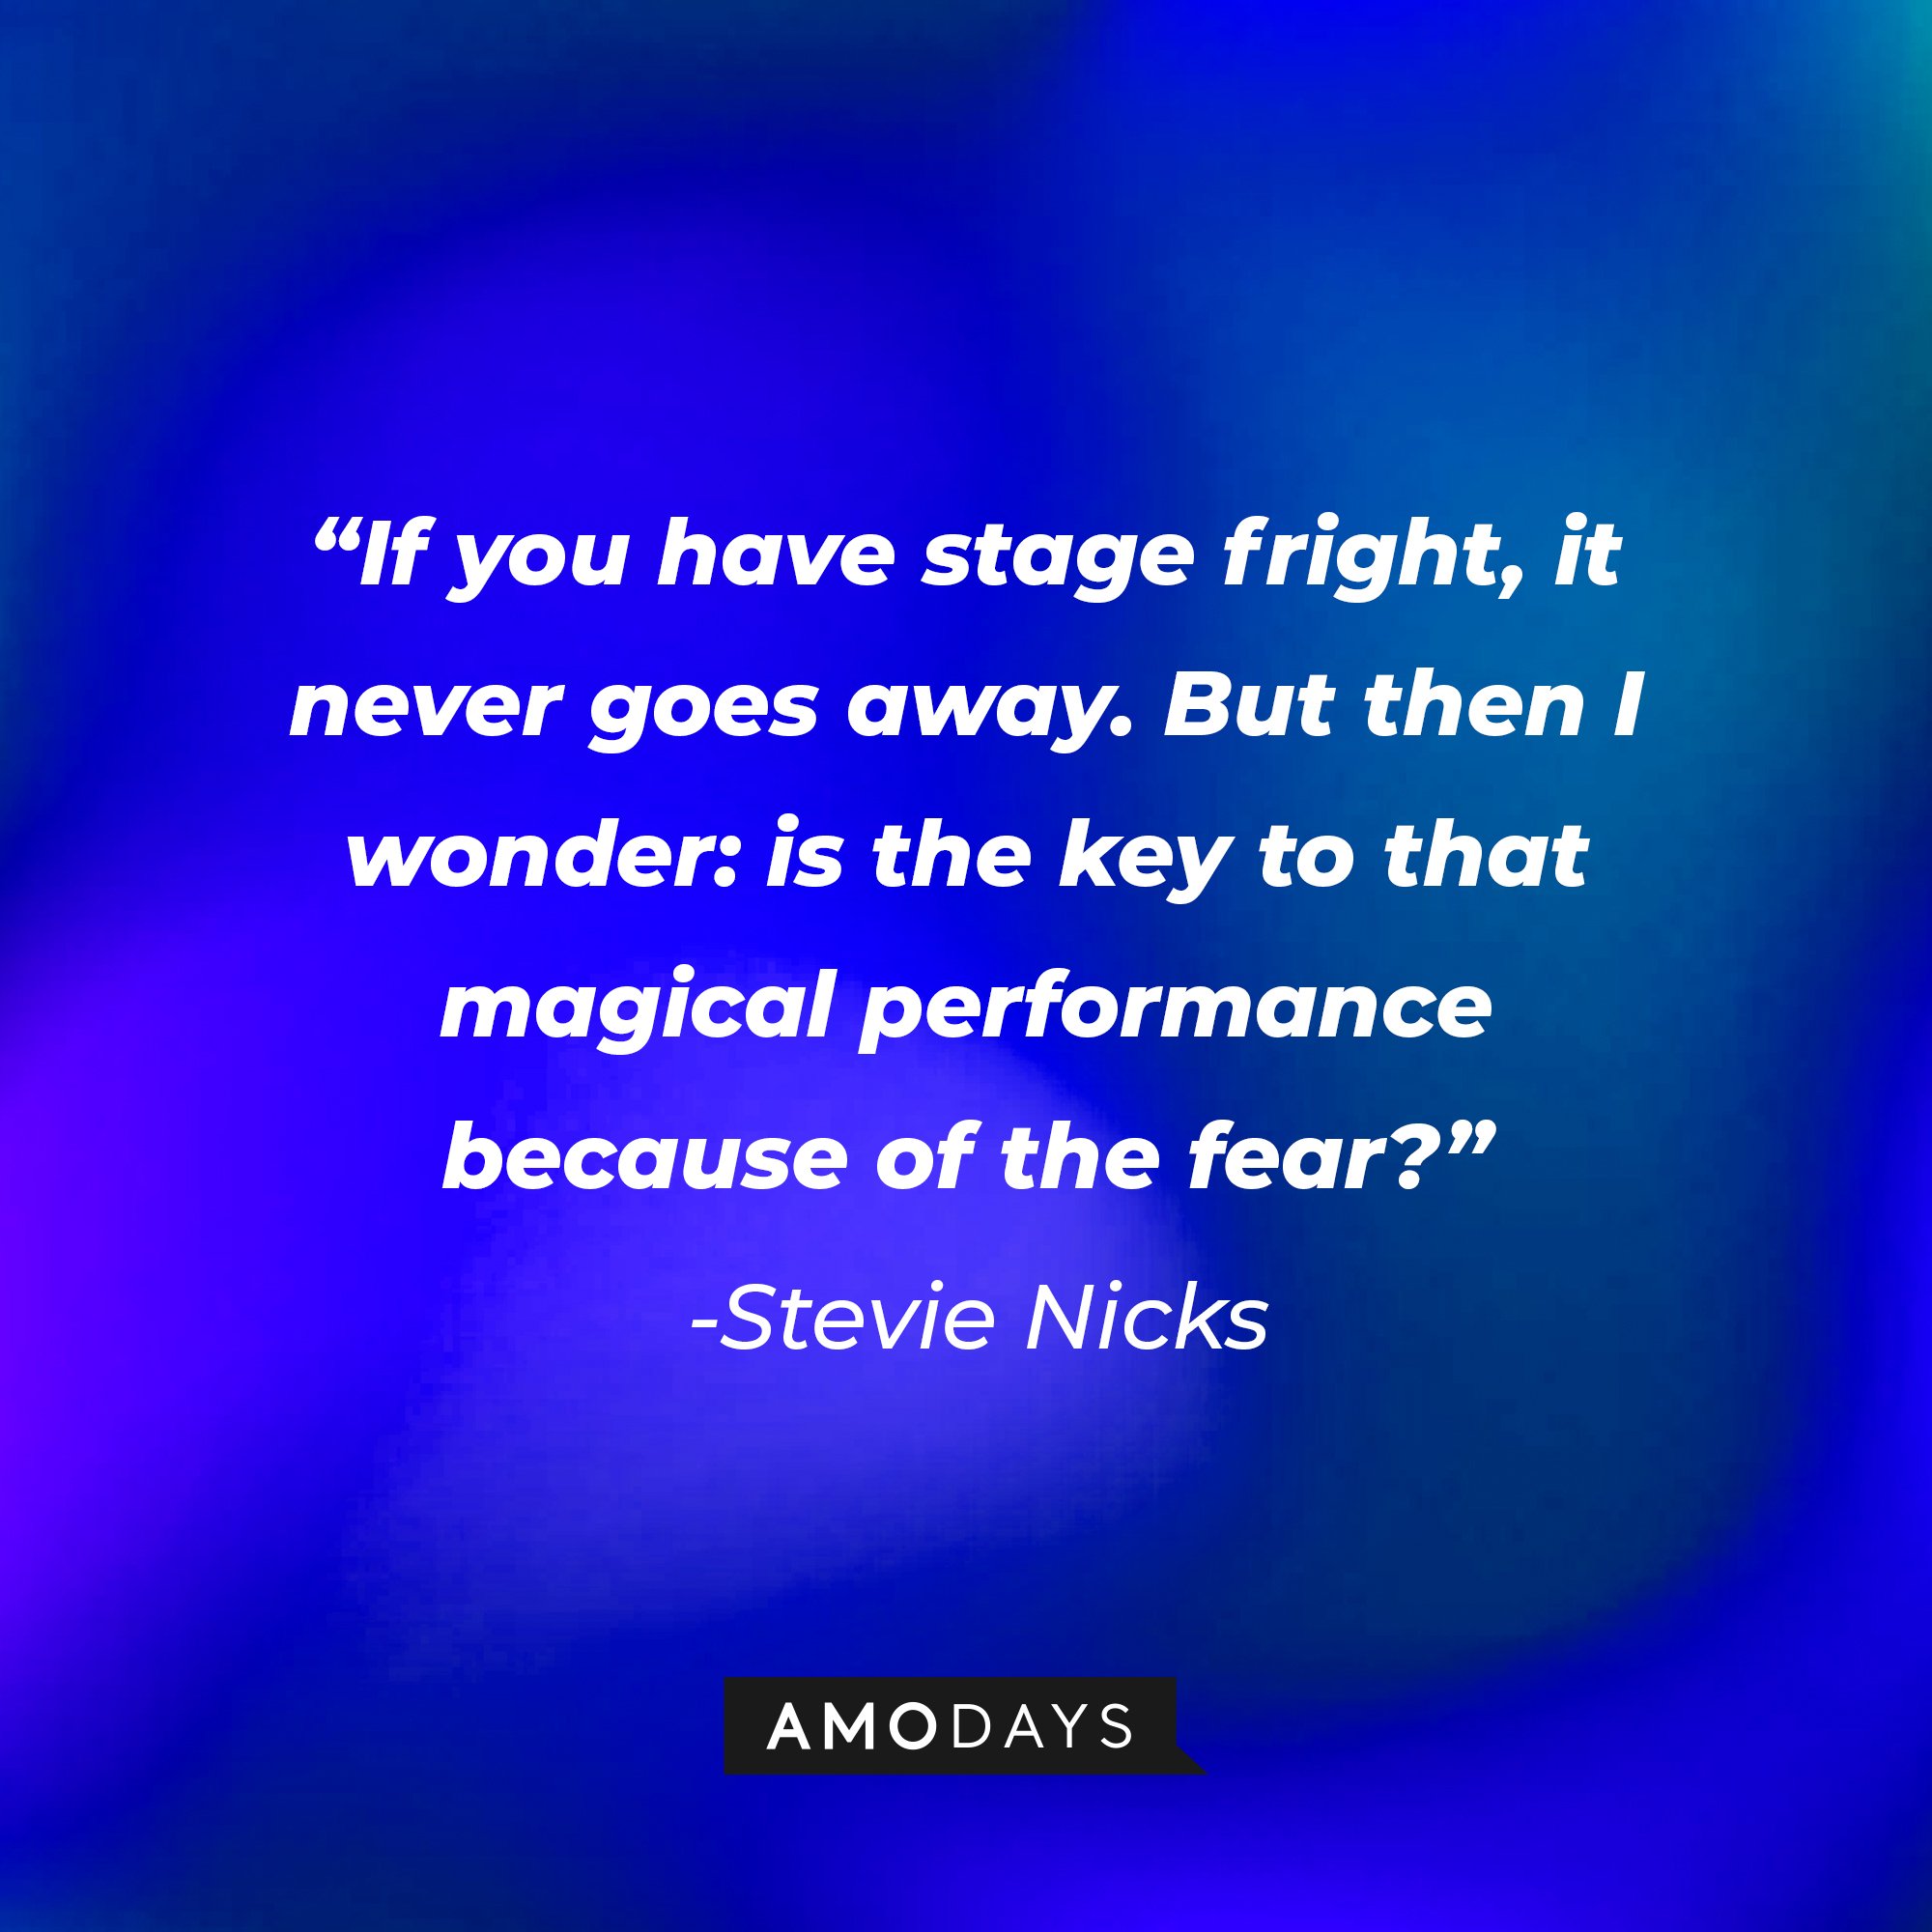 Stevie Nicks's quote: "If you have stage fright, it never goes away. But then I wonder: is the key to that magical performance because of the fear?" | Image: AmoDays